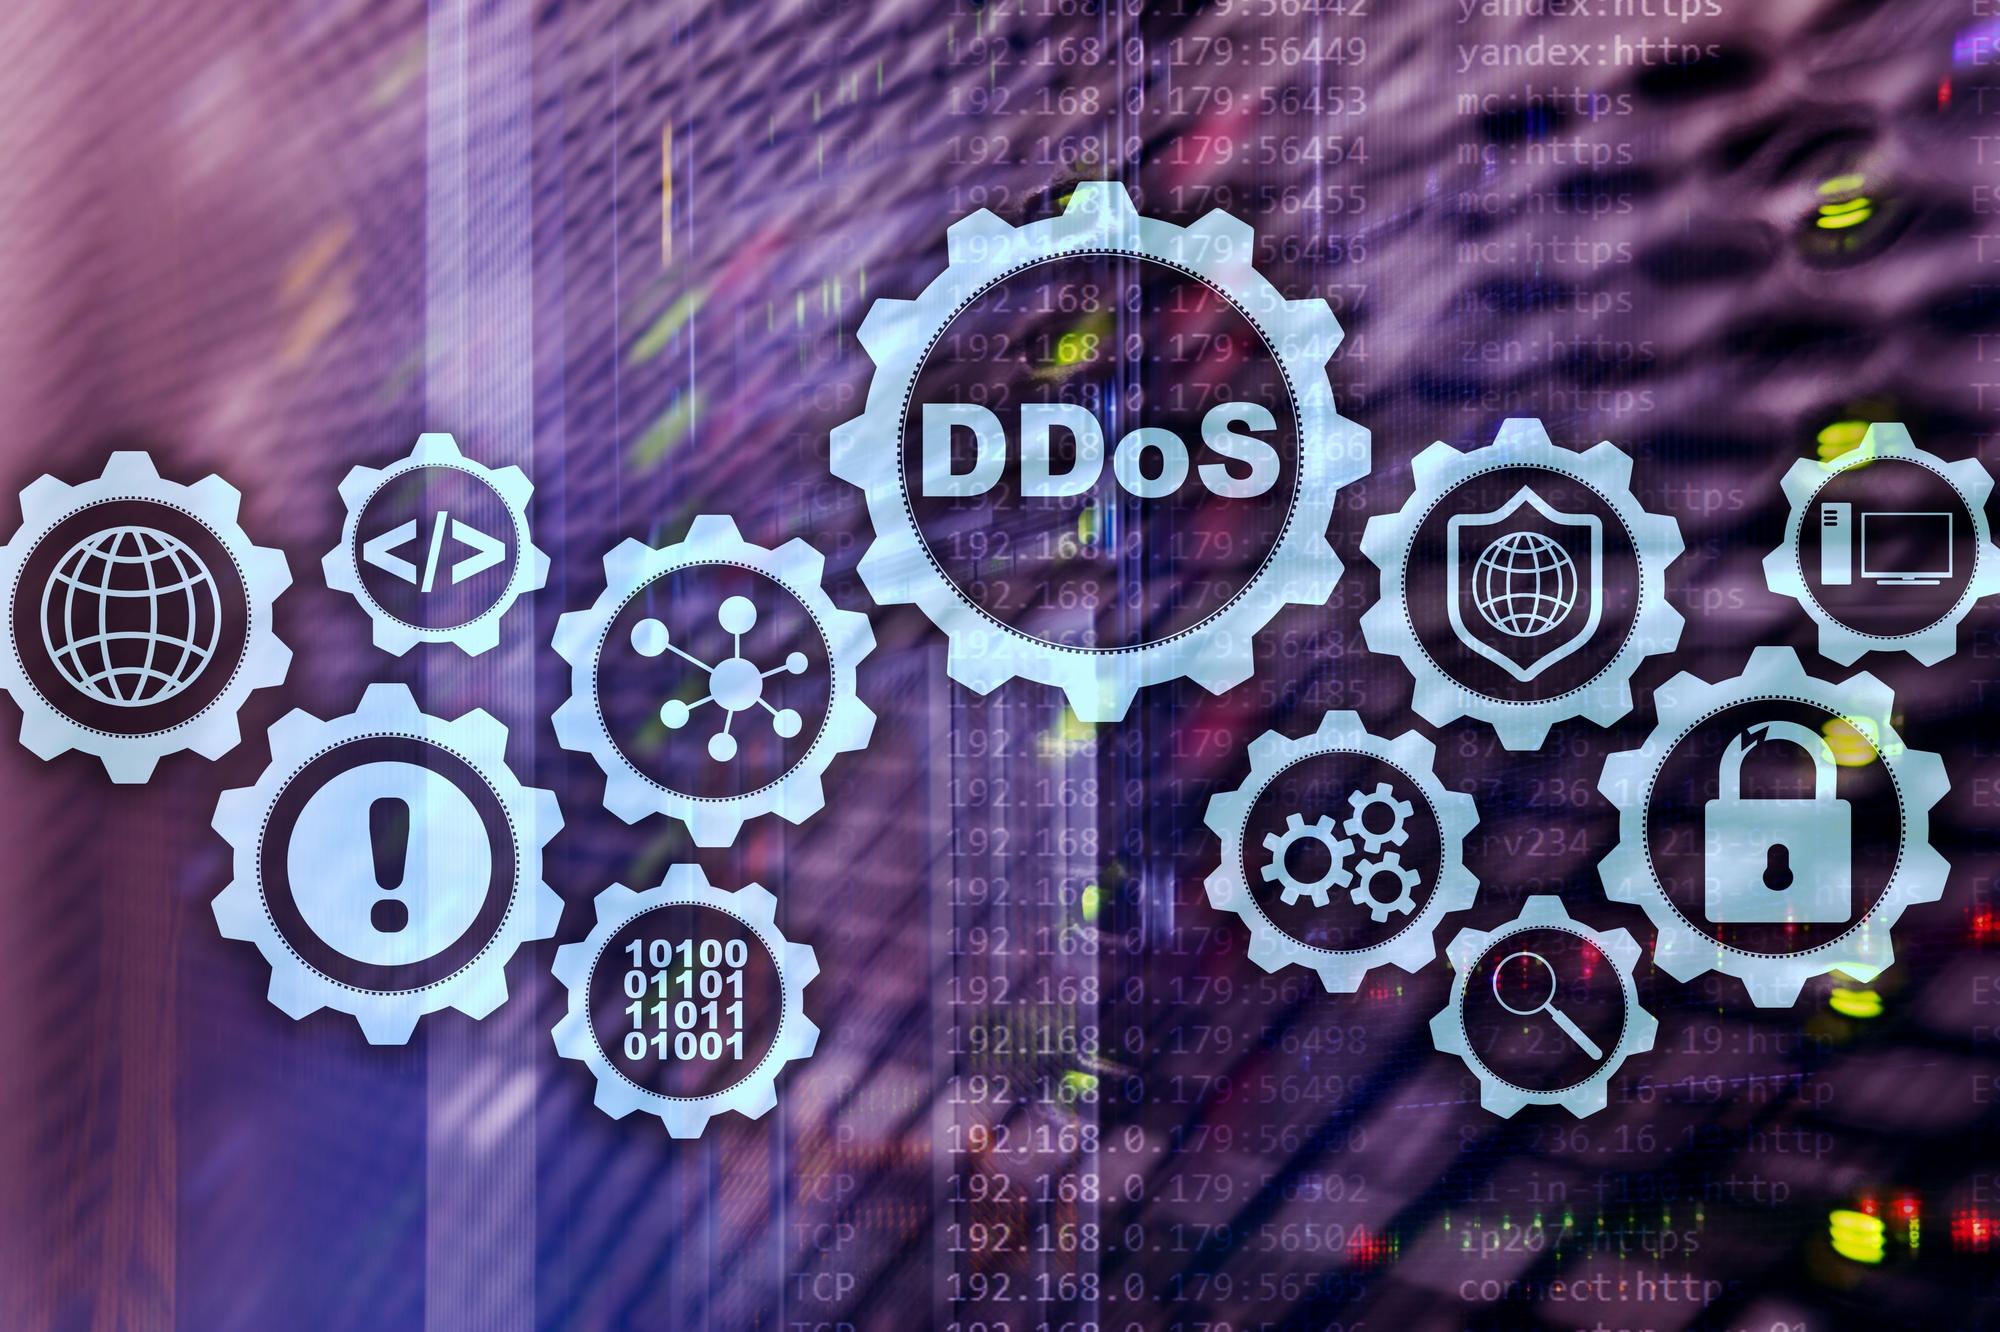 How To Detect and Stop a DDoS Attack Against WordPress